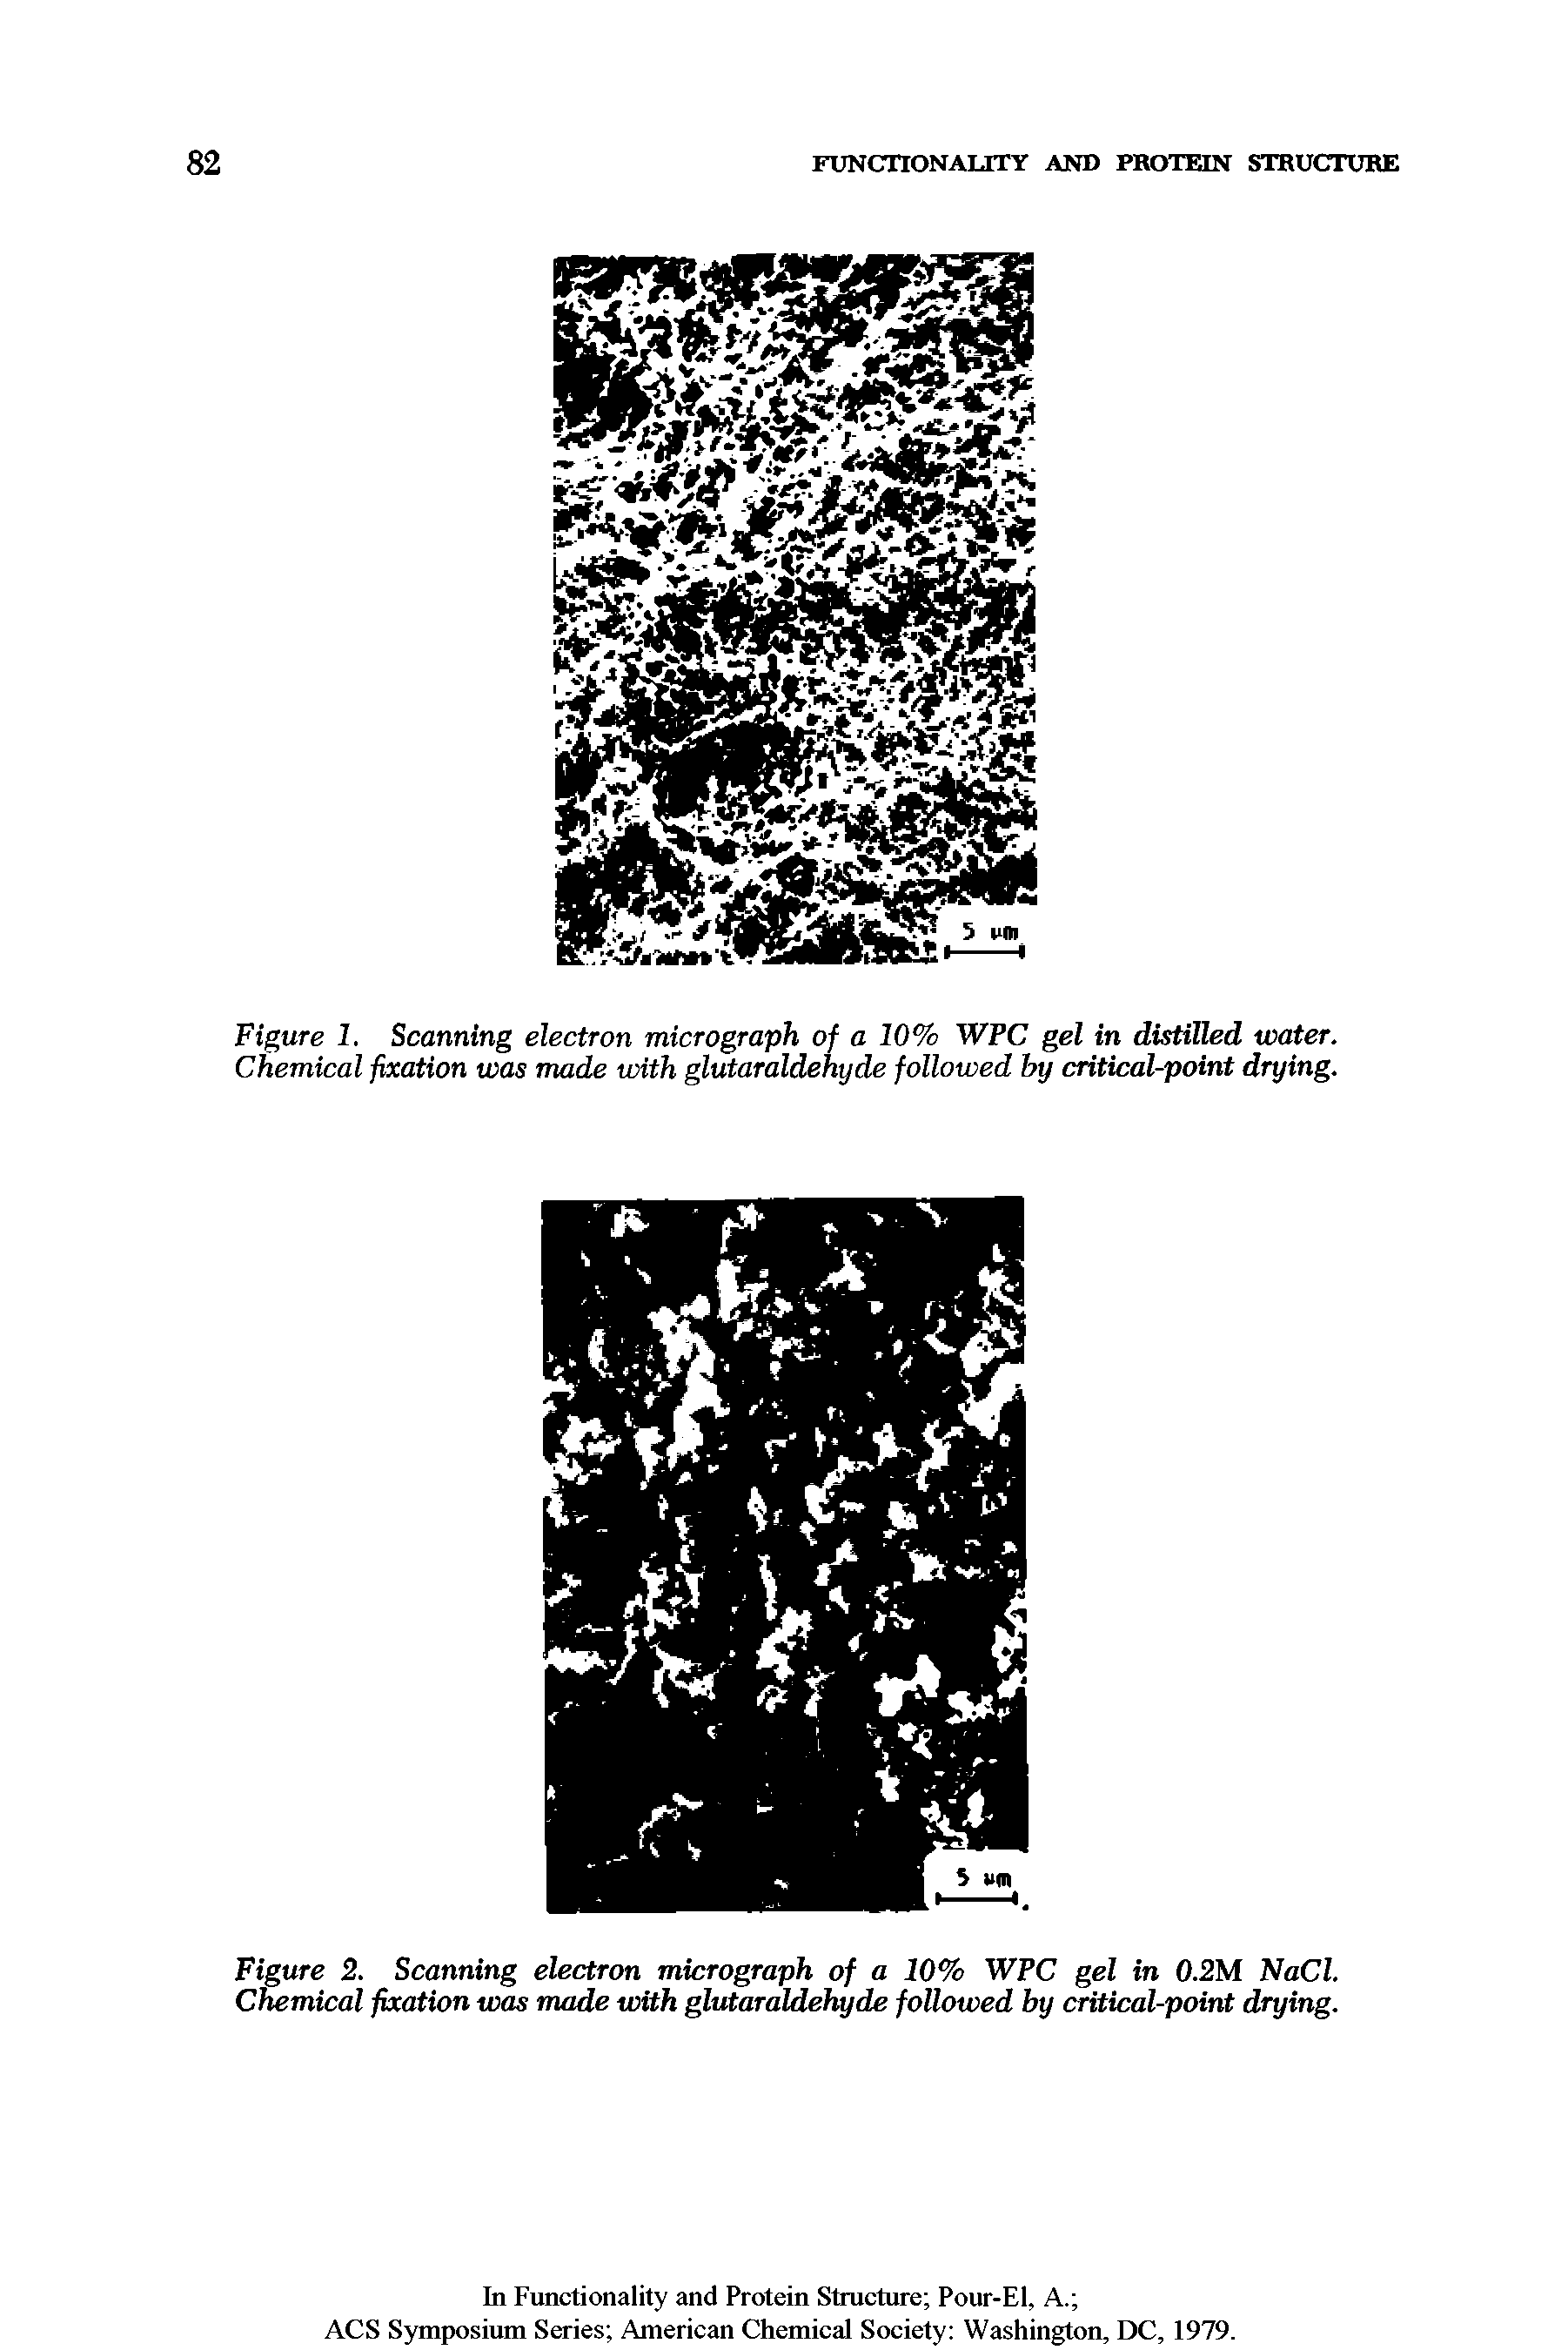 Figure 1. Scanning electron micrograph of a 10% WPC gel in distilled water. Chemical fixation was made with glutaraldehyde followed by critical-point drying.